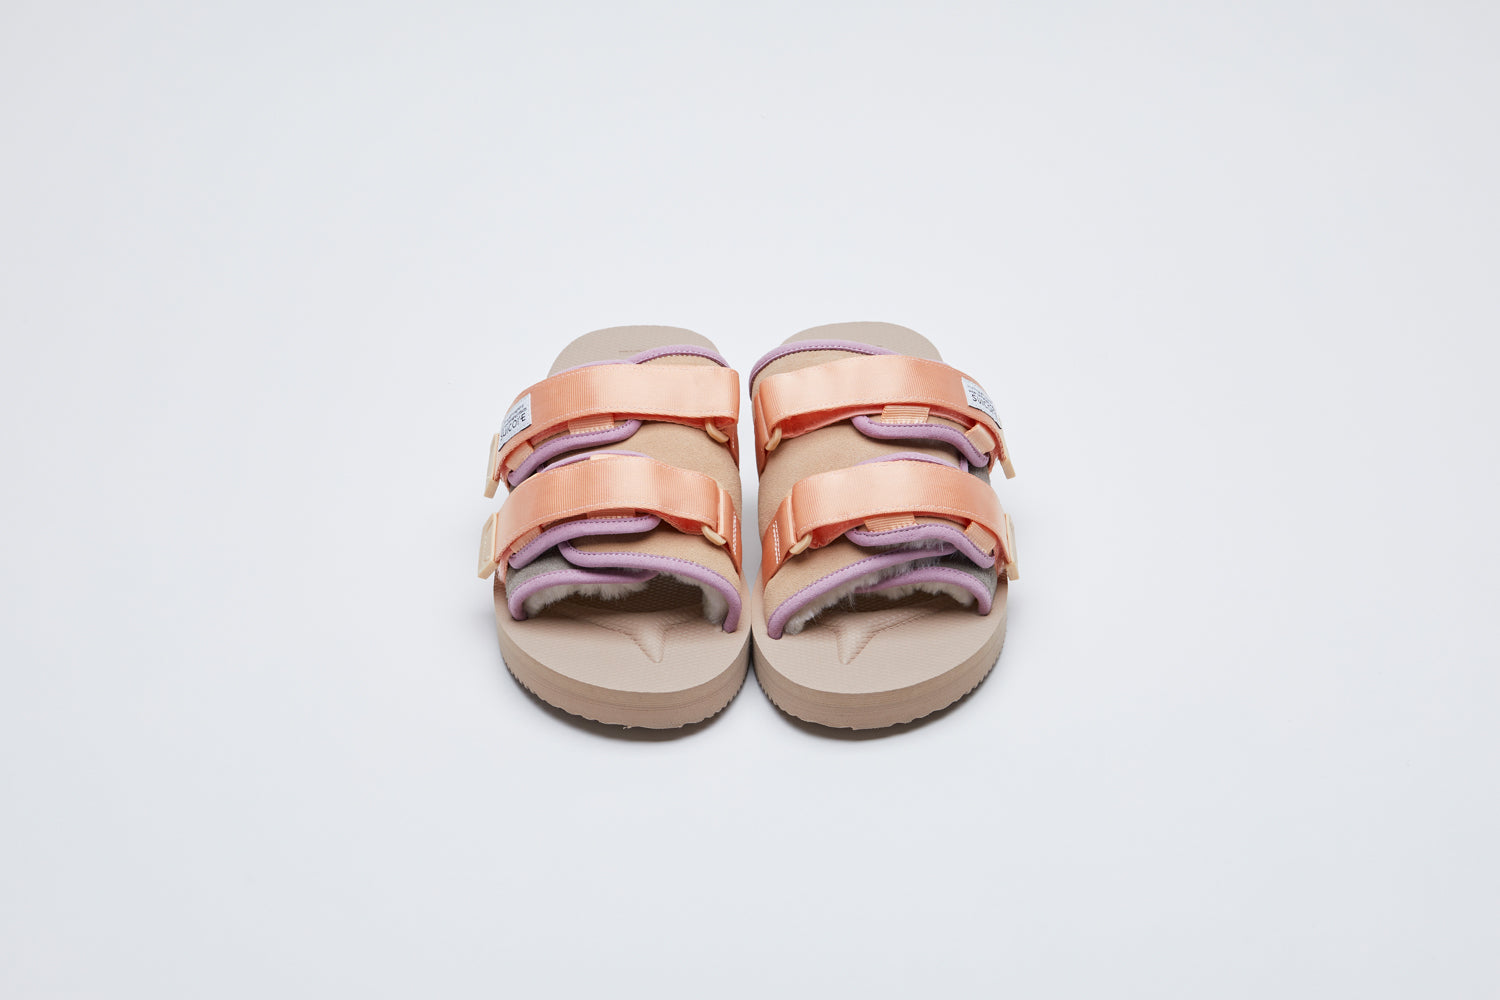 SUICOKE MOTO-Mab suede slides with beige midsole and sole, gray suede upper and shearling inside with light purple piping and light pink nylon straps. From Fall/Winter 2021 collection on SUICOKE Official US &amp; Canada Webstore.